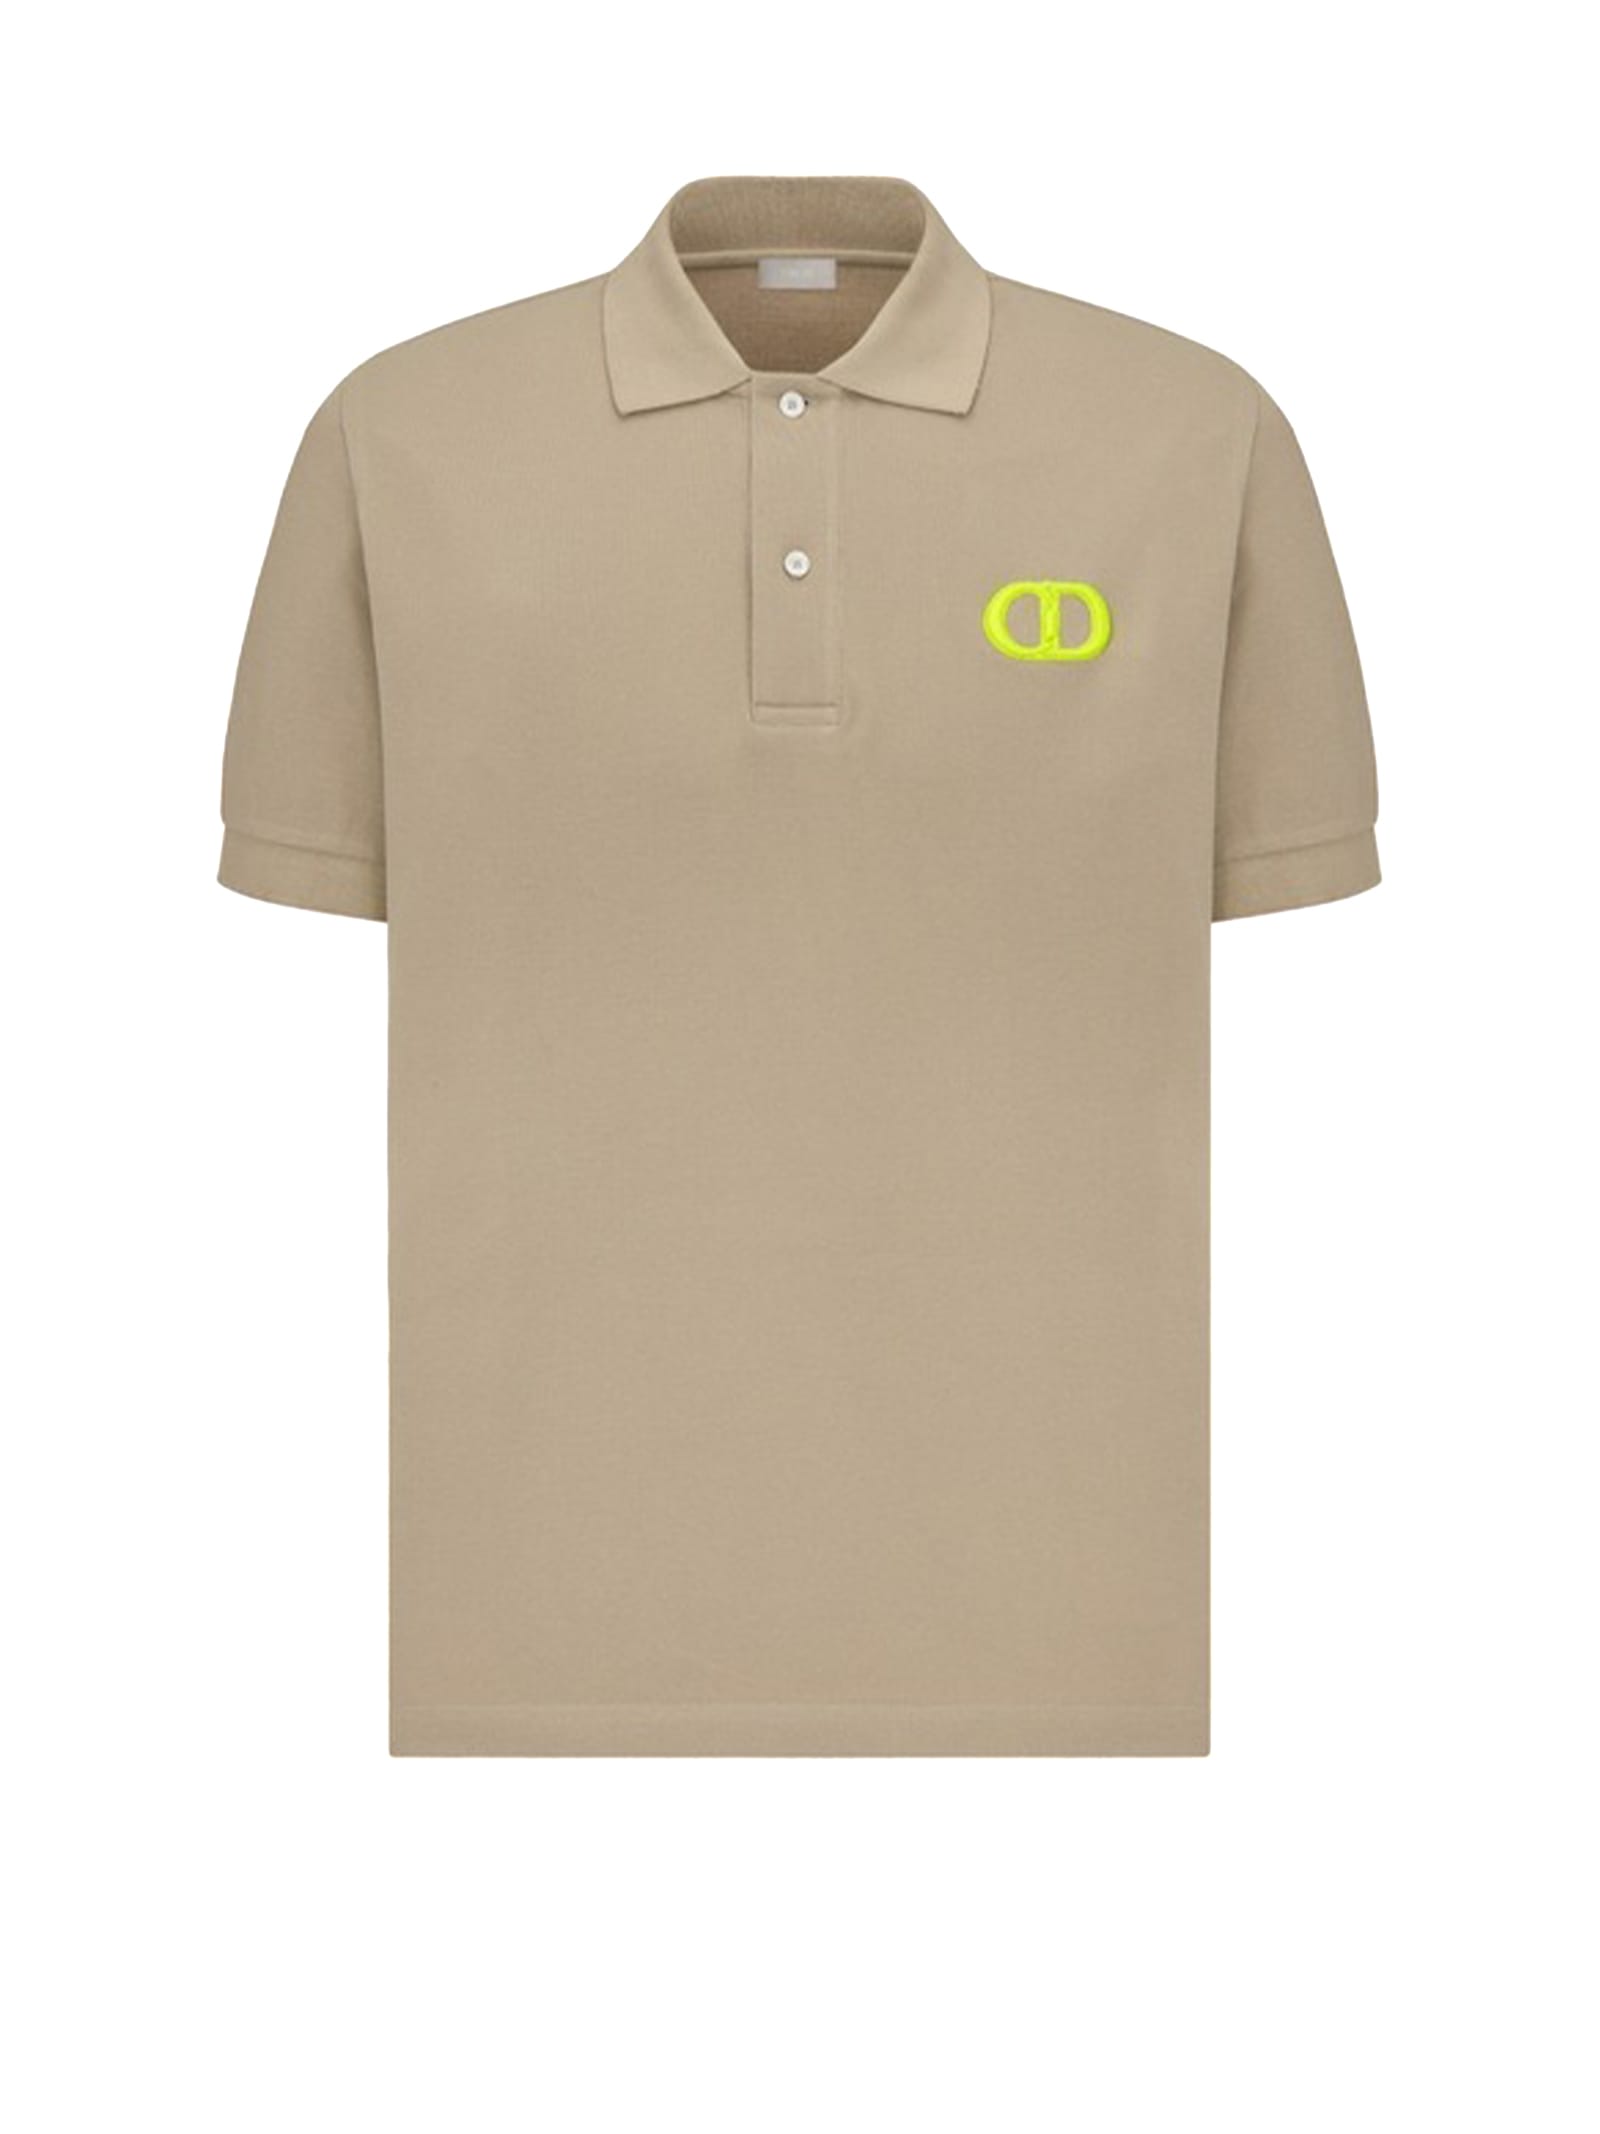 Dior Polo Shirt In Beige Neon Yellow